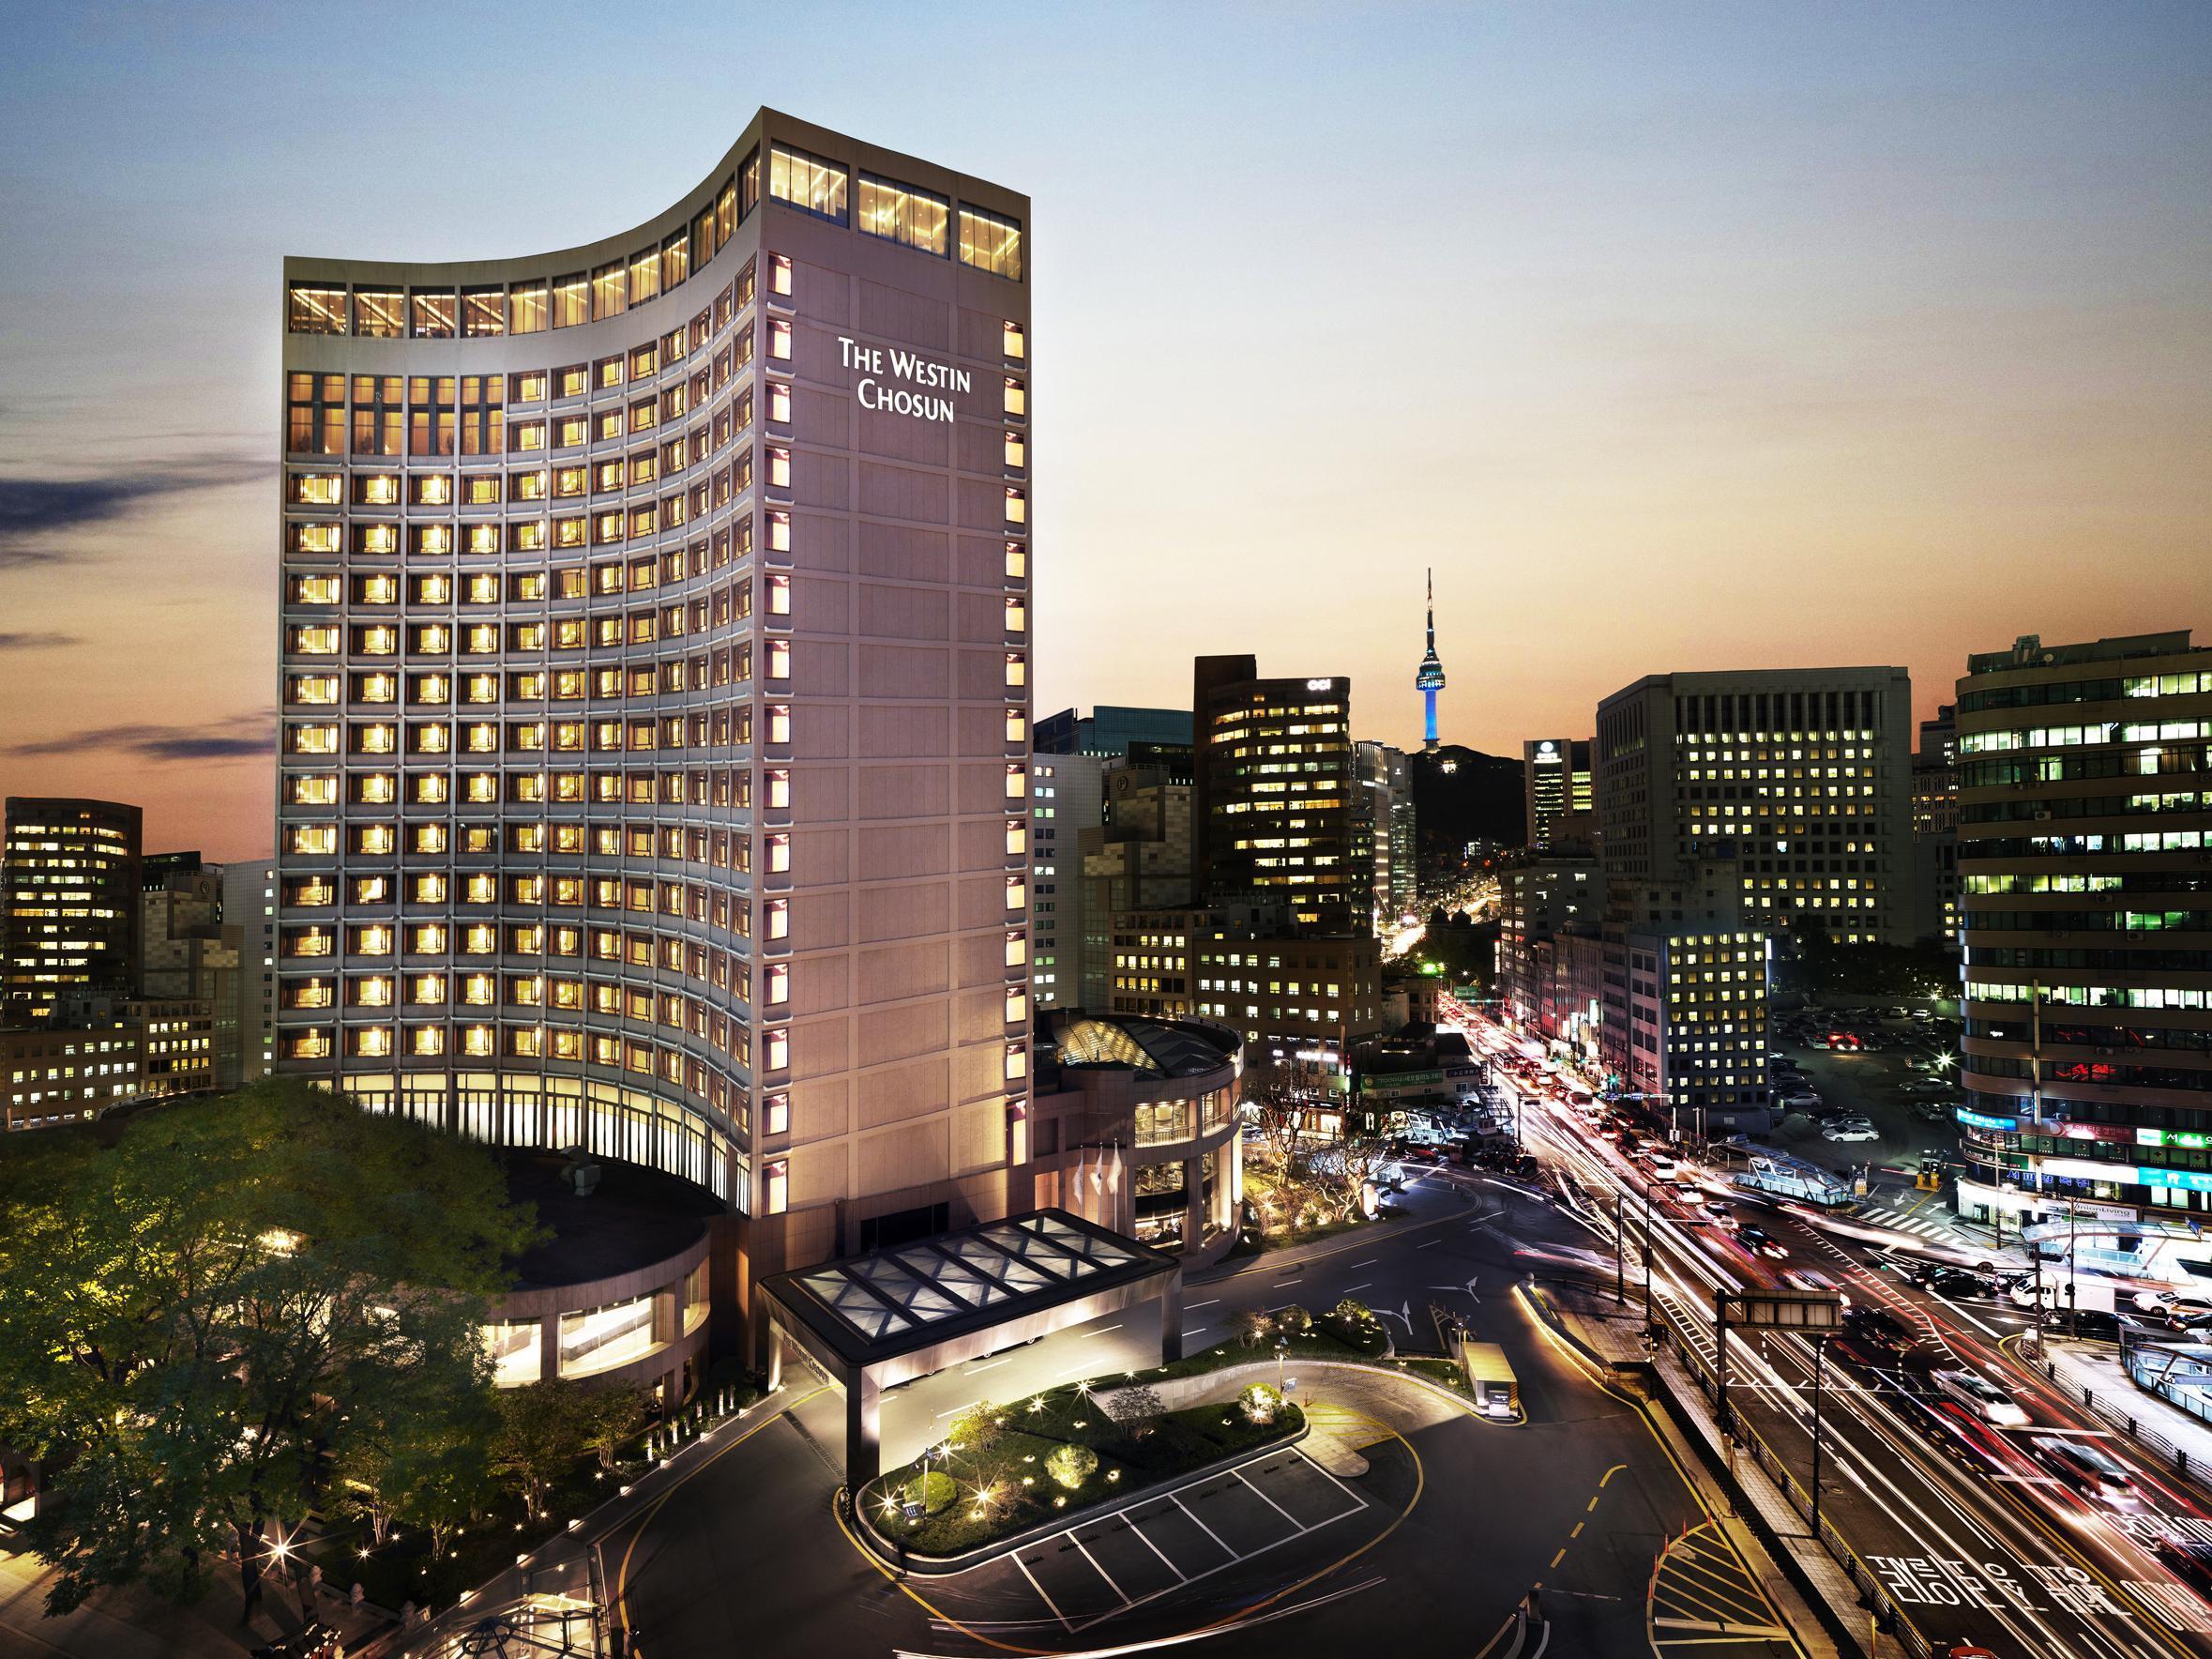 The Westin Chosun Seoul Korea FAQ 2016, What facilities are there in The Westin Chosun Seoul Korea 2016, What Languages Spoken are Supported in The Westin Chosun Seoul Korea 2016, Which payment cards are accepted in The Westin Chosun Seoul Korea , Korea The Westin Chosun Seoul room facilities and services Q&A 2016, Korea The Westin Chosun Seoul online booking services 2016, Korea The Westin Chosun Seoul address 2016, Korea The Westin Chosun Seoul telephone number 2016,Korea The Westin Chosun Seoul map 2016, Korea The Westin Chosun Seoul traffic guide 2016, how to go Korea The Westin Chosun Seoul, Korea The Westin Chosun Seoul booking online 2016, Korea The Westin Chosun Seoul room types 2016.